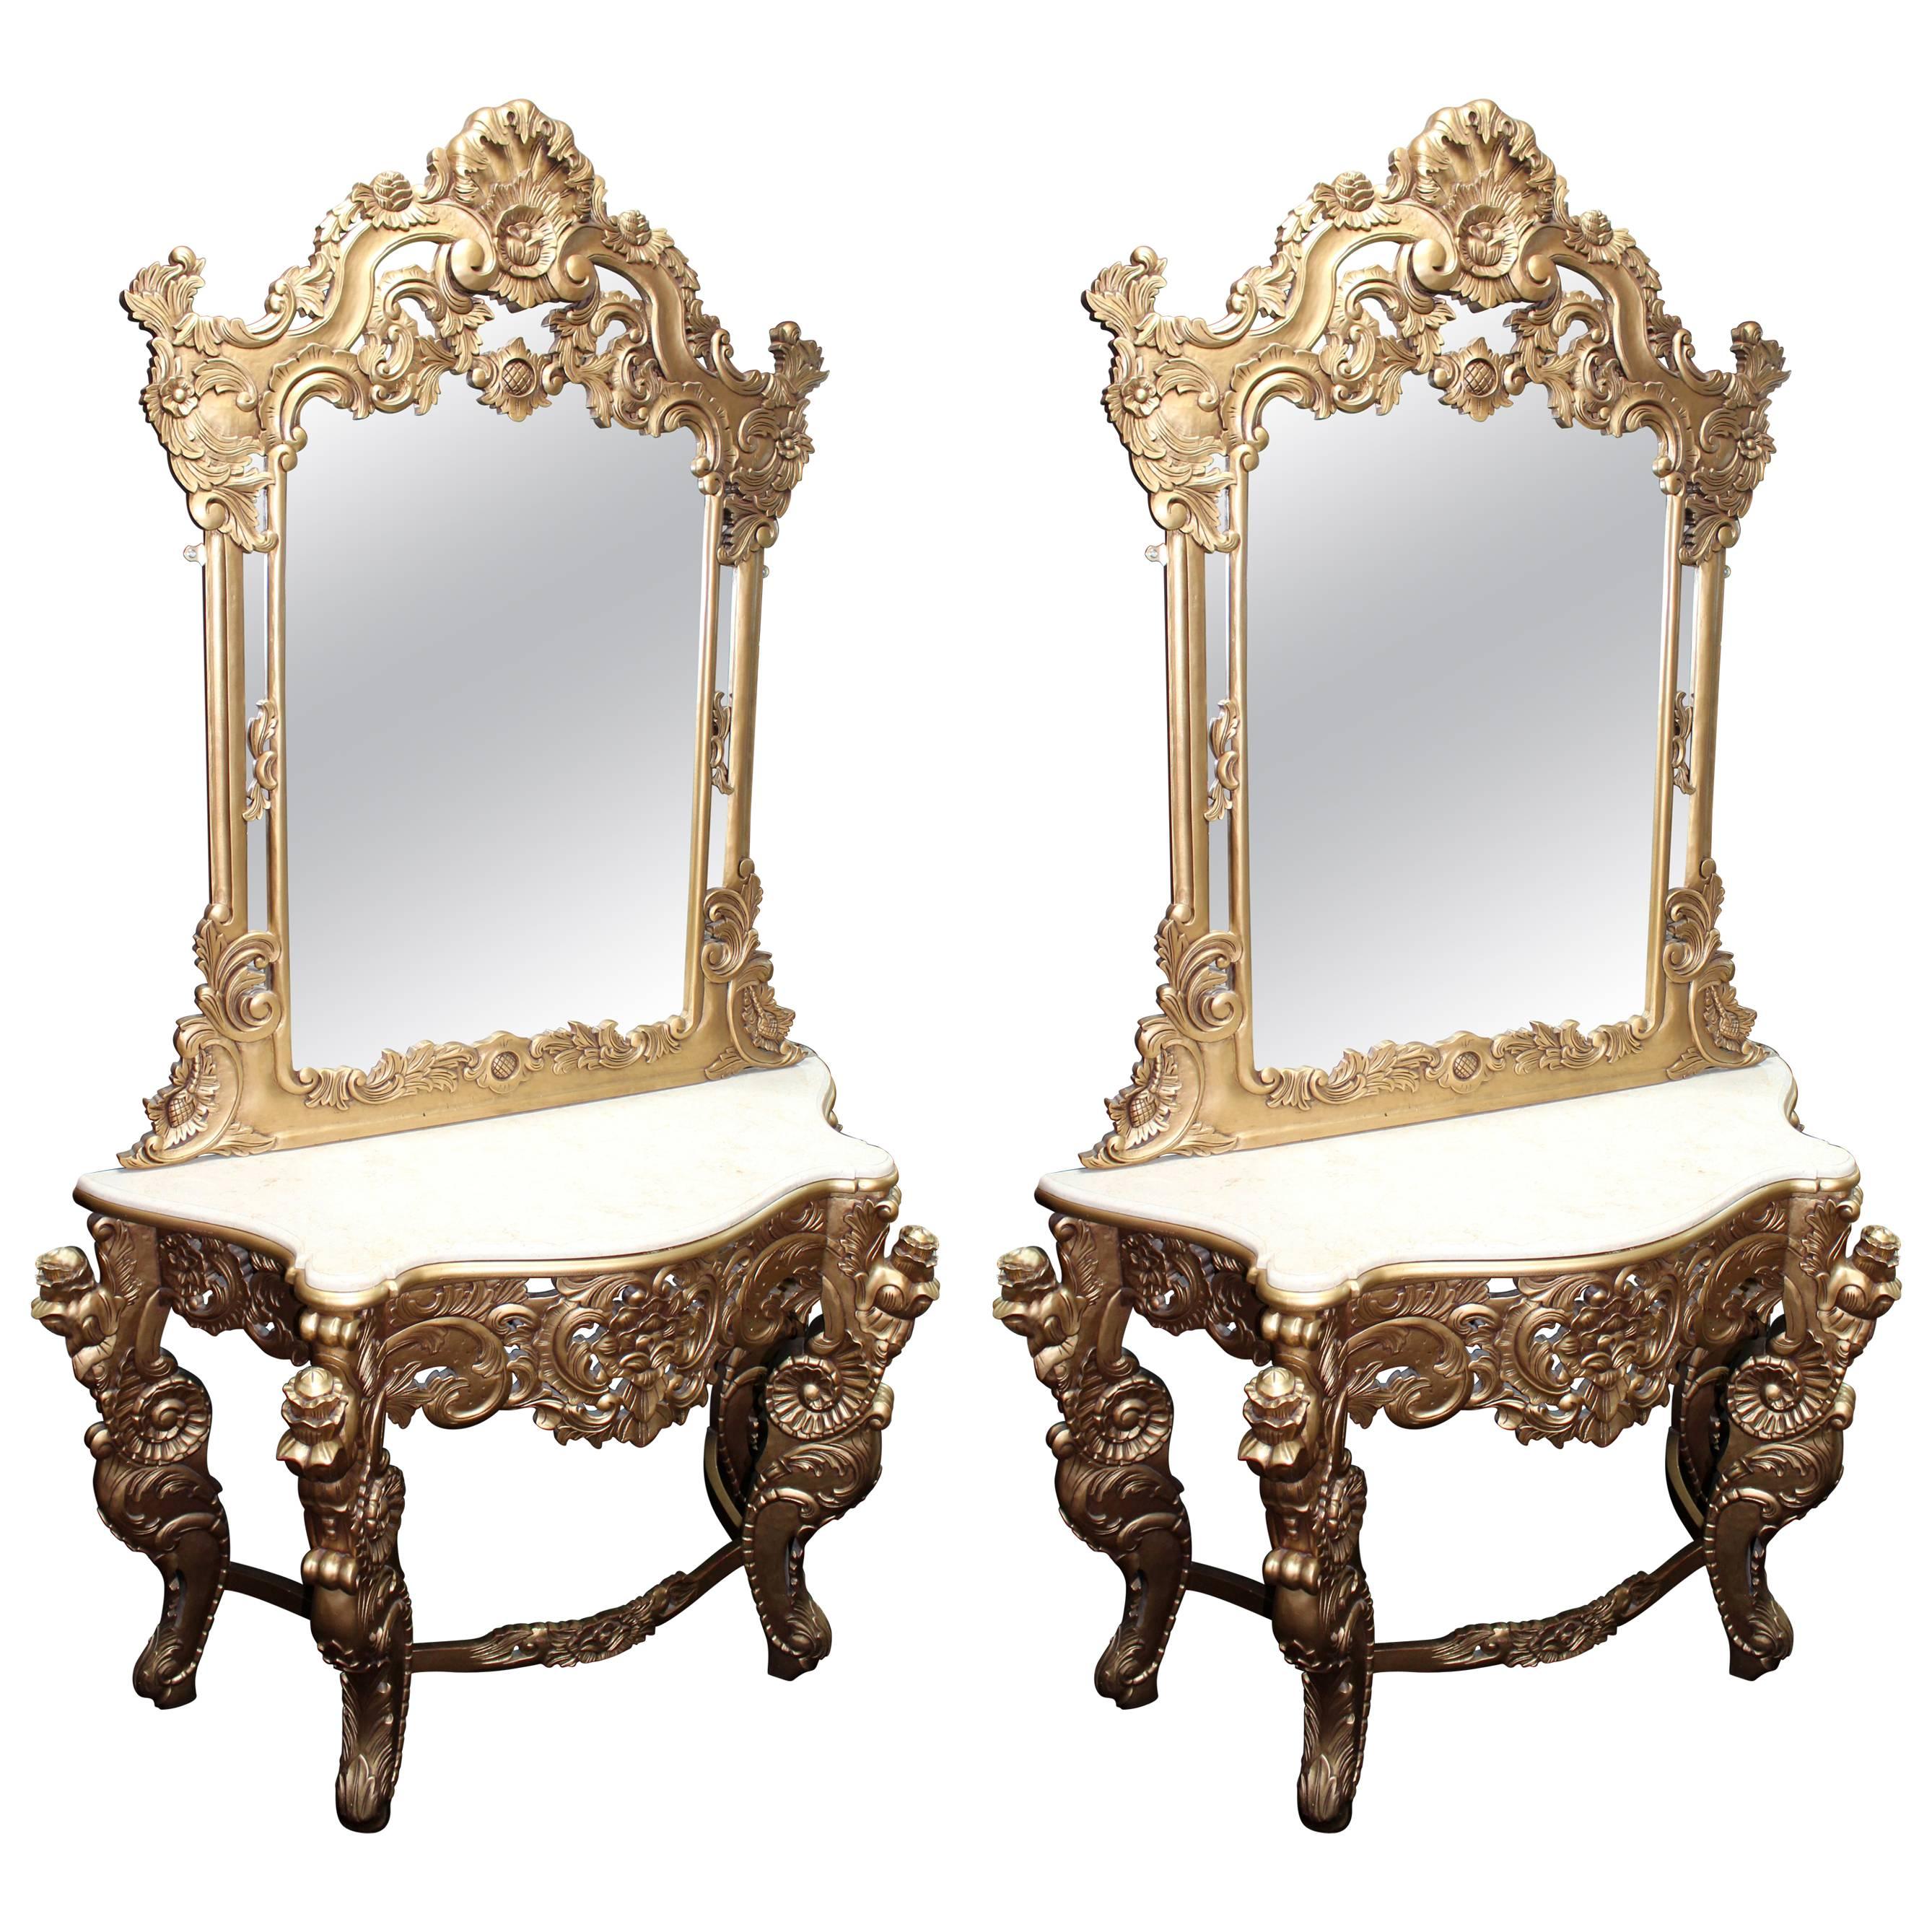 Pair of Carved Giltwood Marble-Topped Console Tables with Mirrors